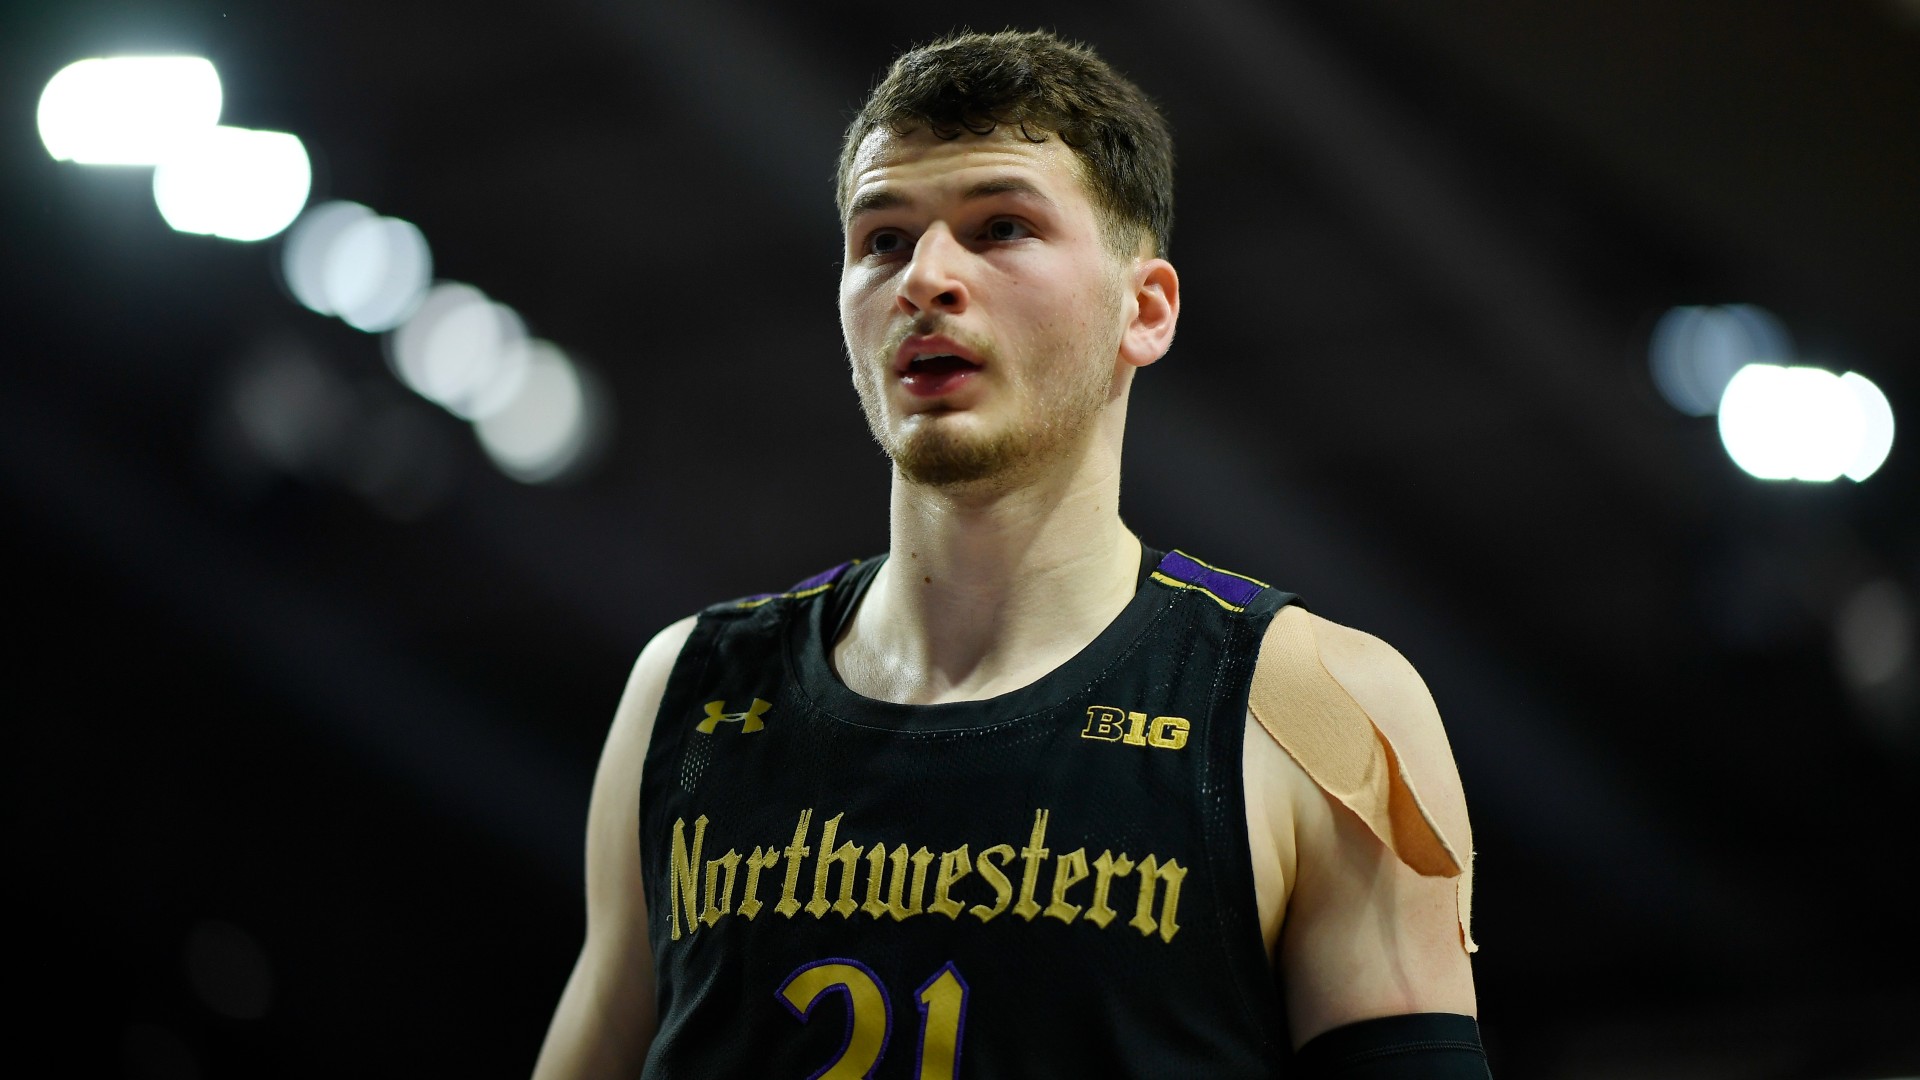 Monday College Basketball Odds, Picks & Predictions: The 66% System Bet for Northwestern vs. Iowa (Feb. 28) article feature image